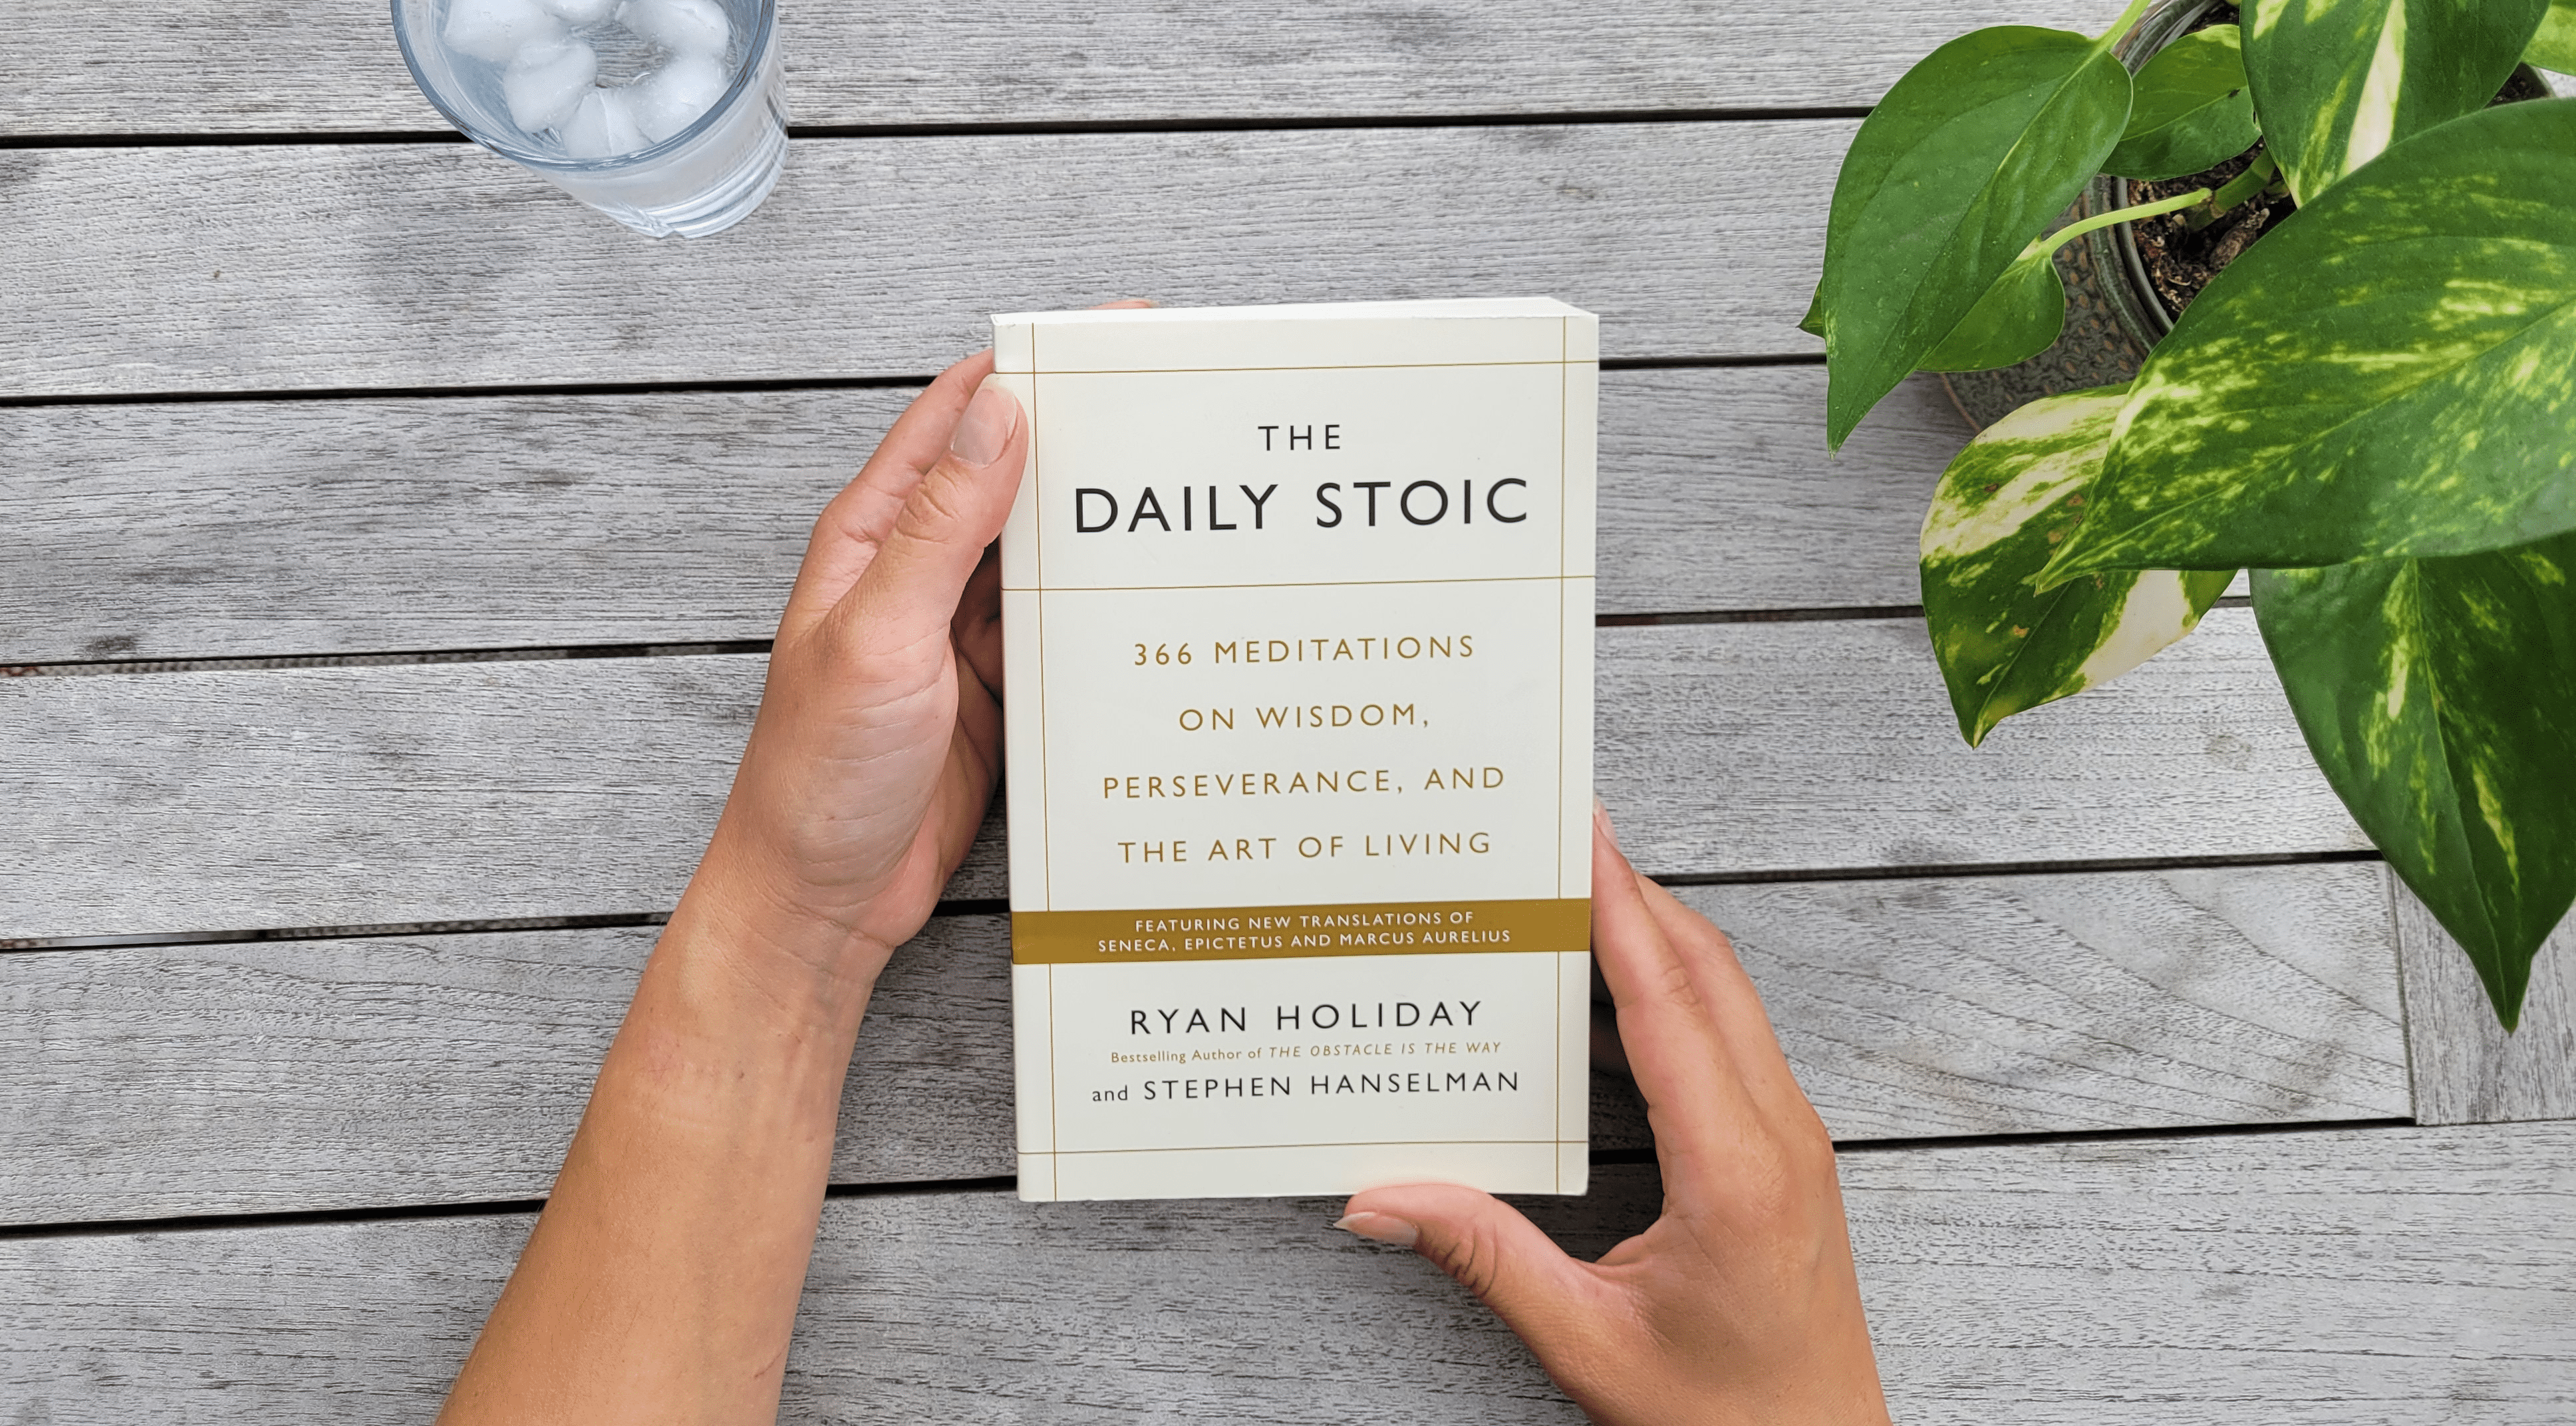 Summary – The Daily Stoic: 366 Meditations on Wisdom, Perseverance, and the Art of Living by Ryan Holiday and Stephen Hanselman